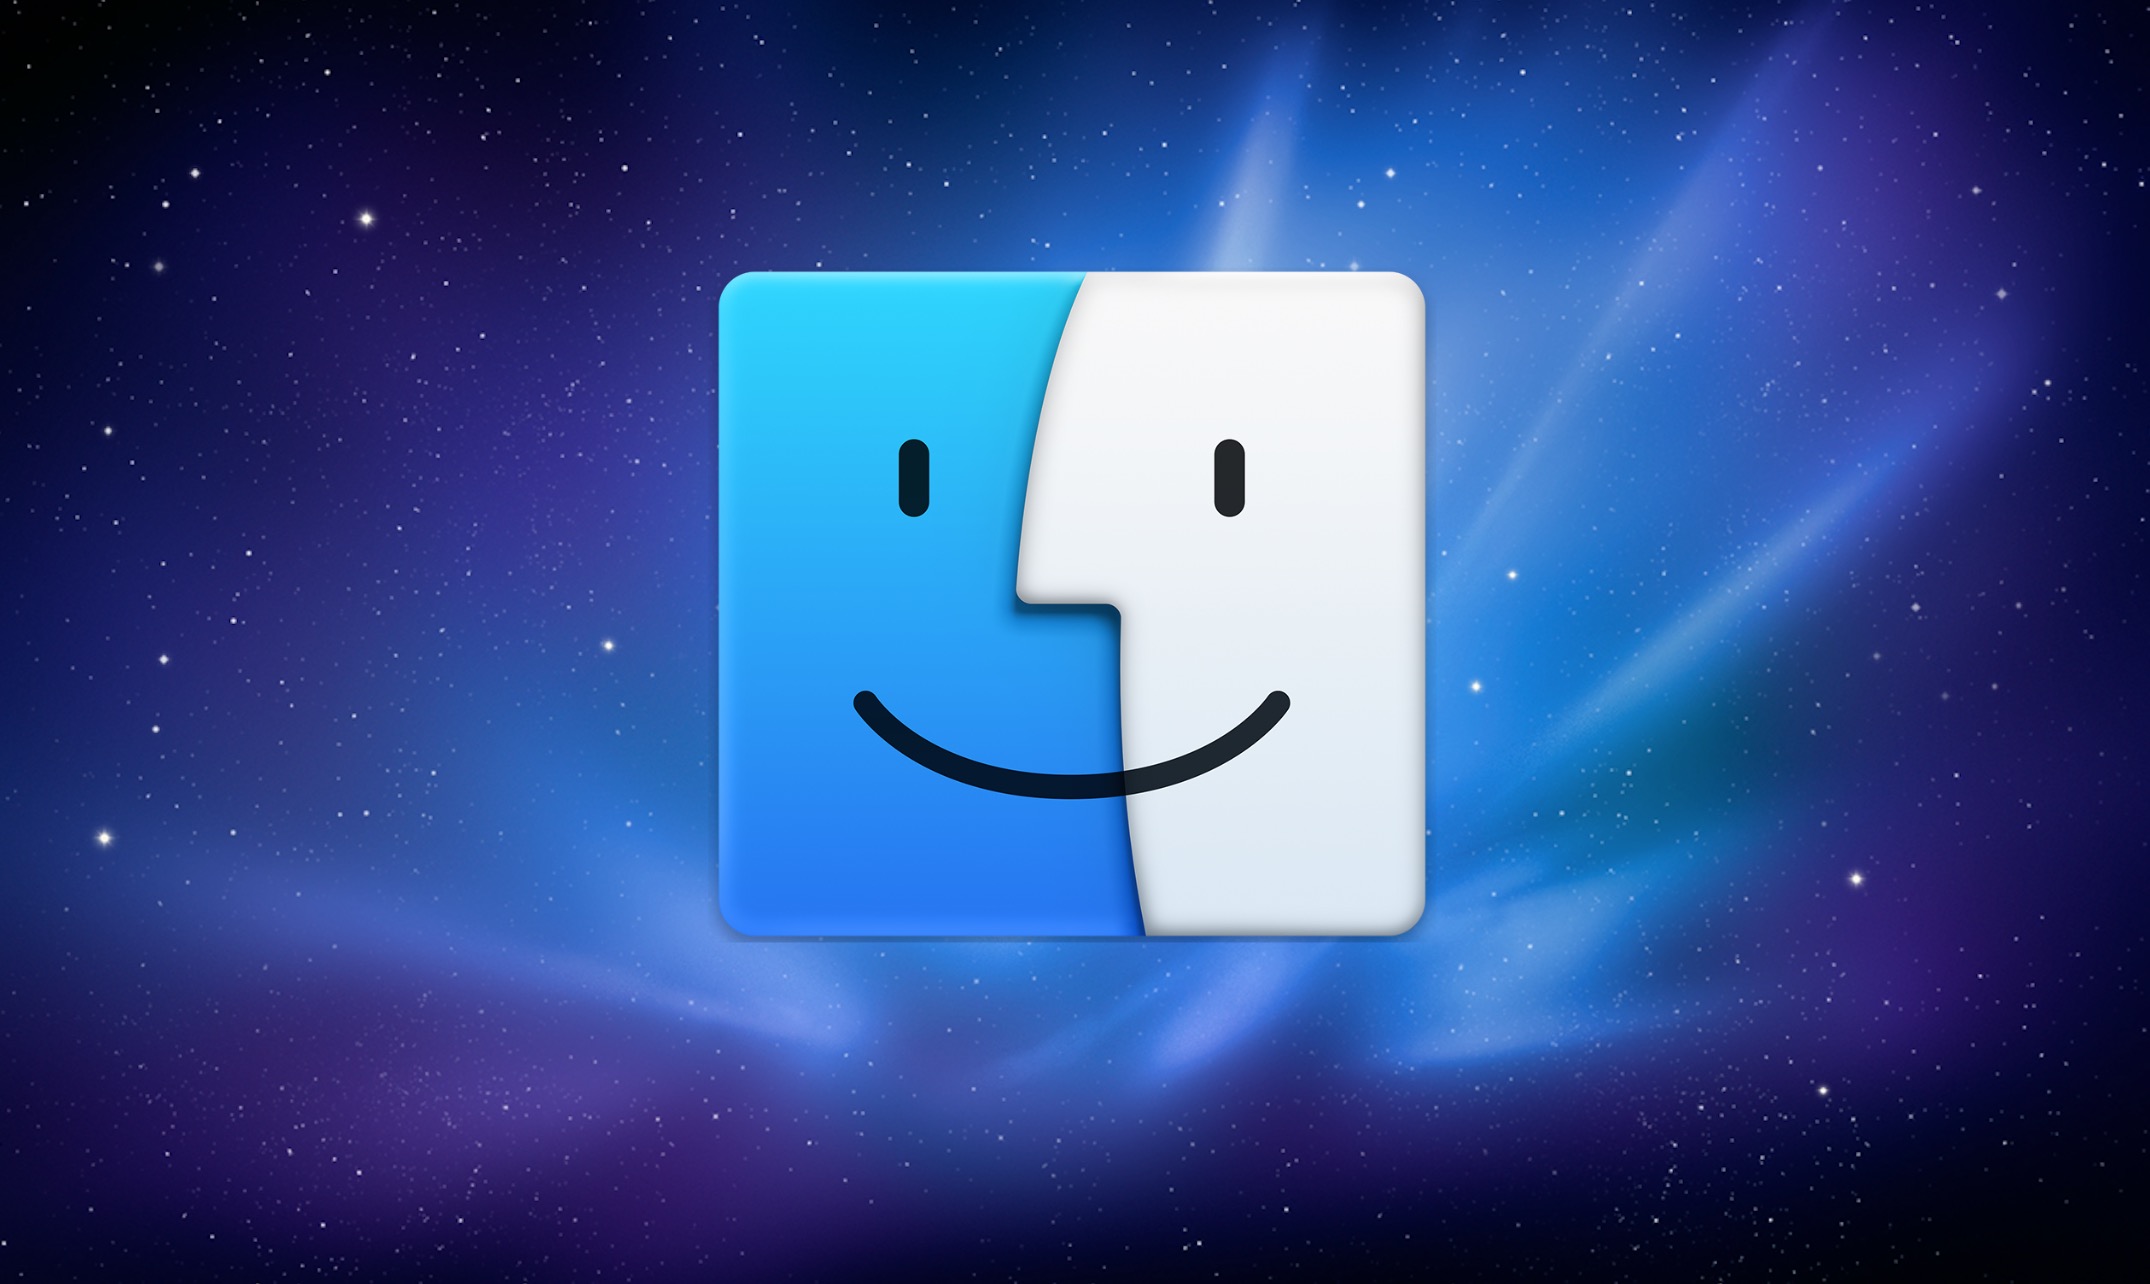 How To Merge Two Folders with the Same Name on Mac Using Finder